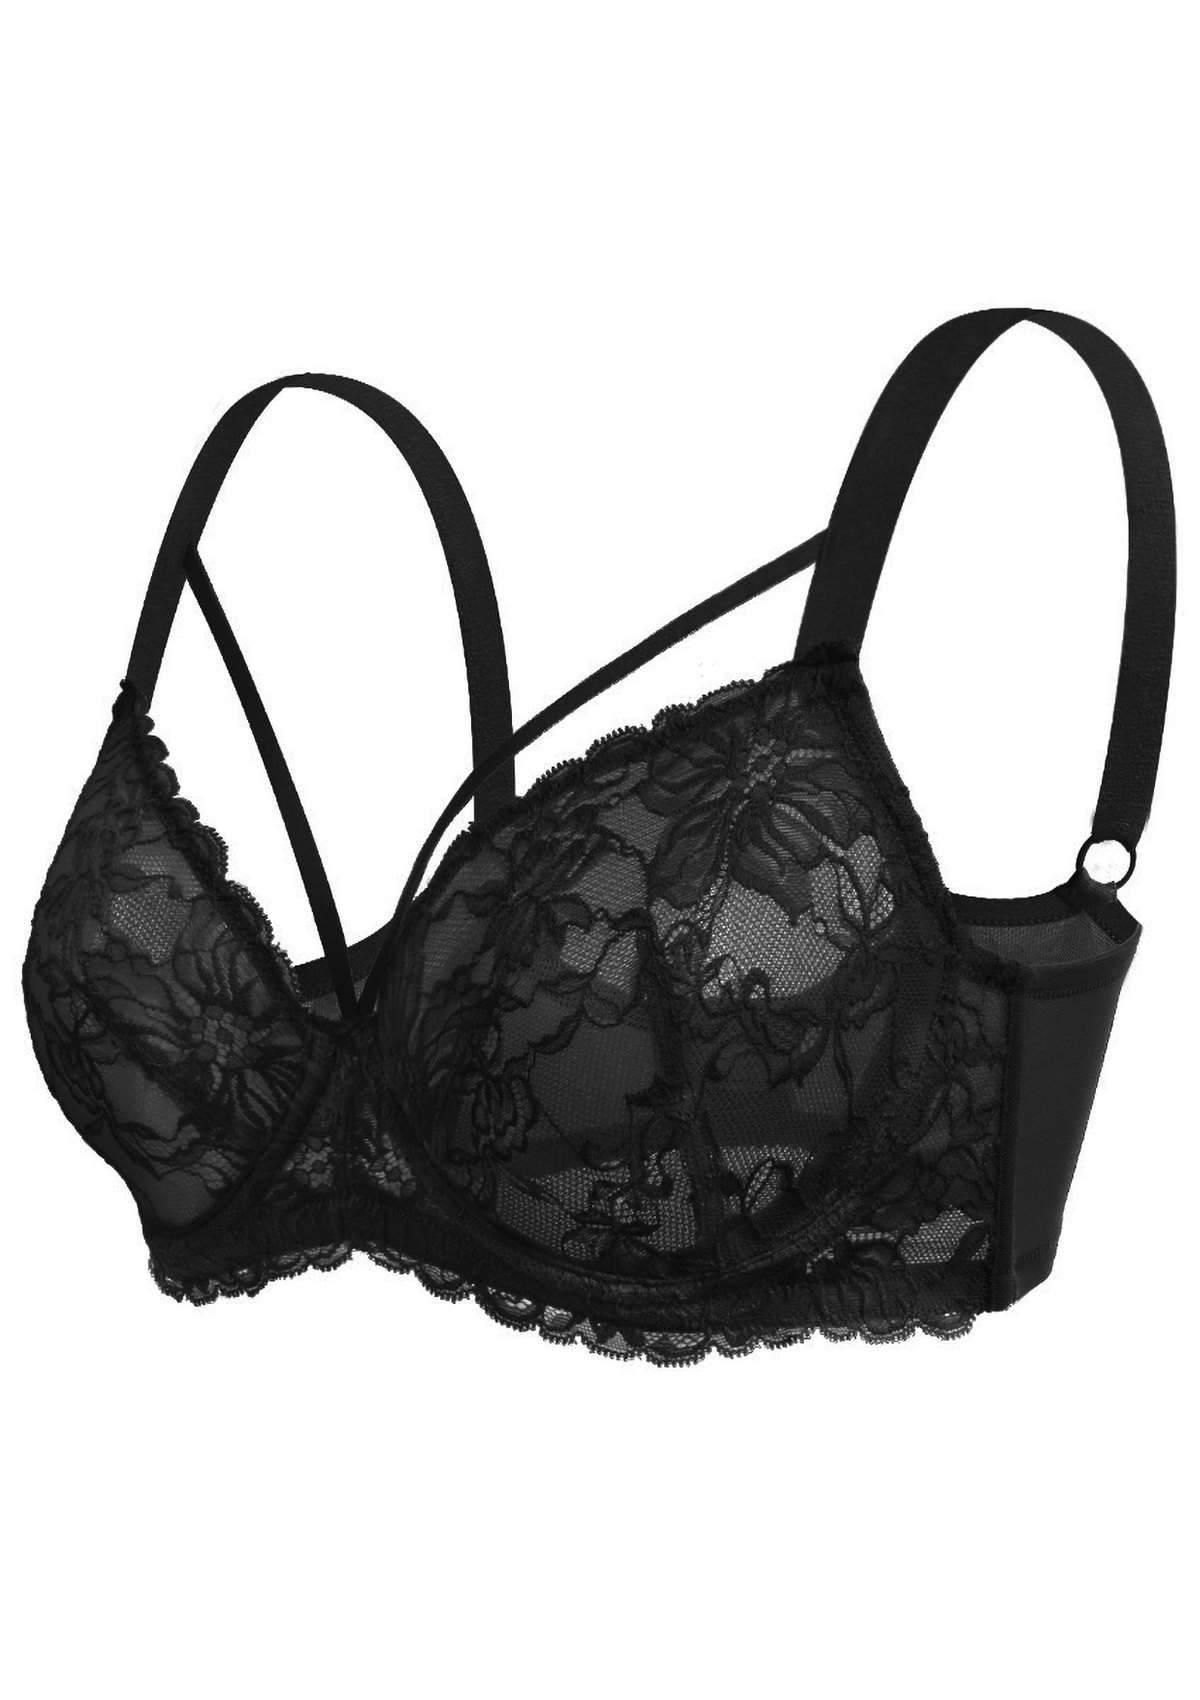 HSIA Pretty In Petals Bra - Plus Size Lingerie For Comfrot And Support - Black / 46 / DDD/F